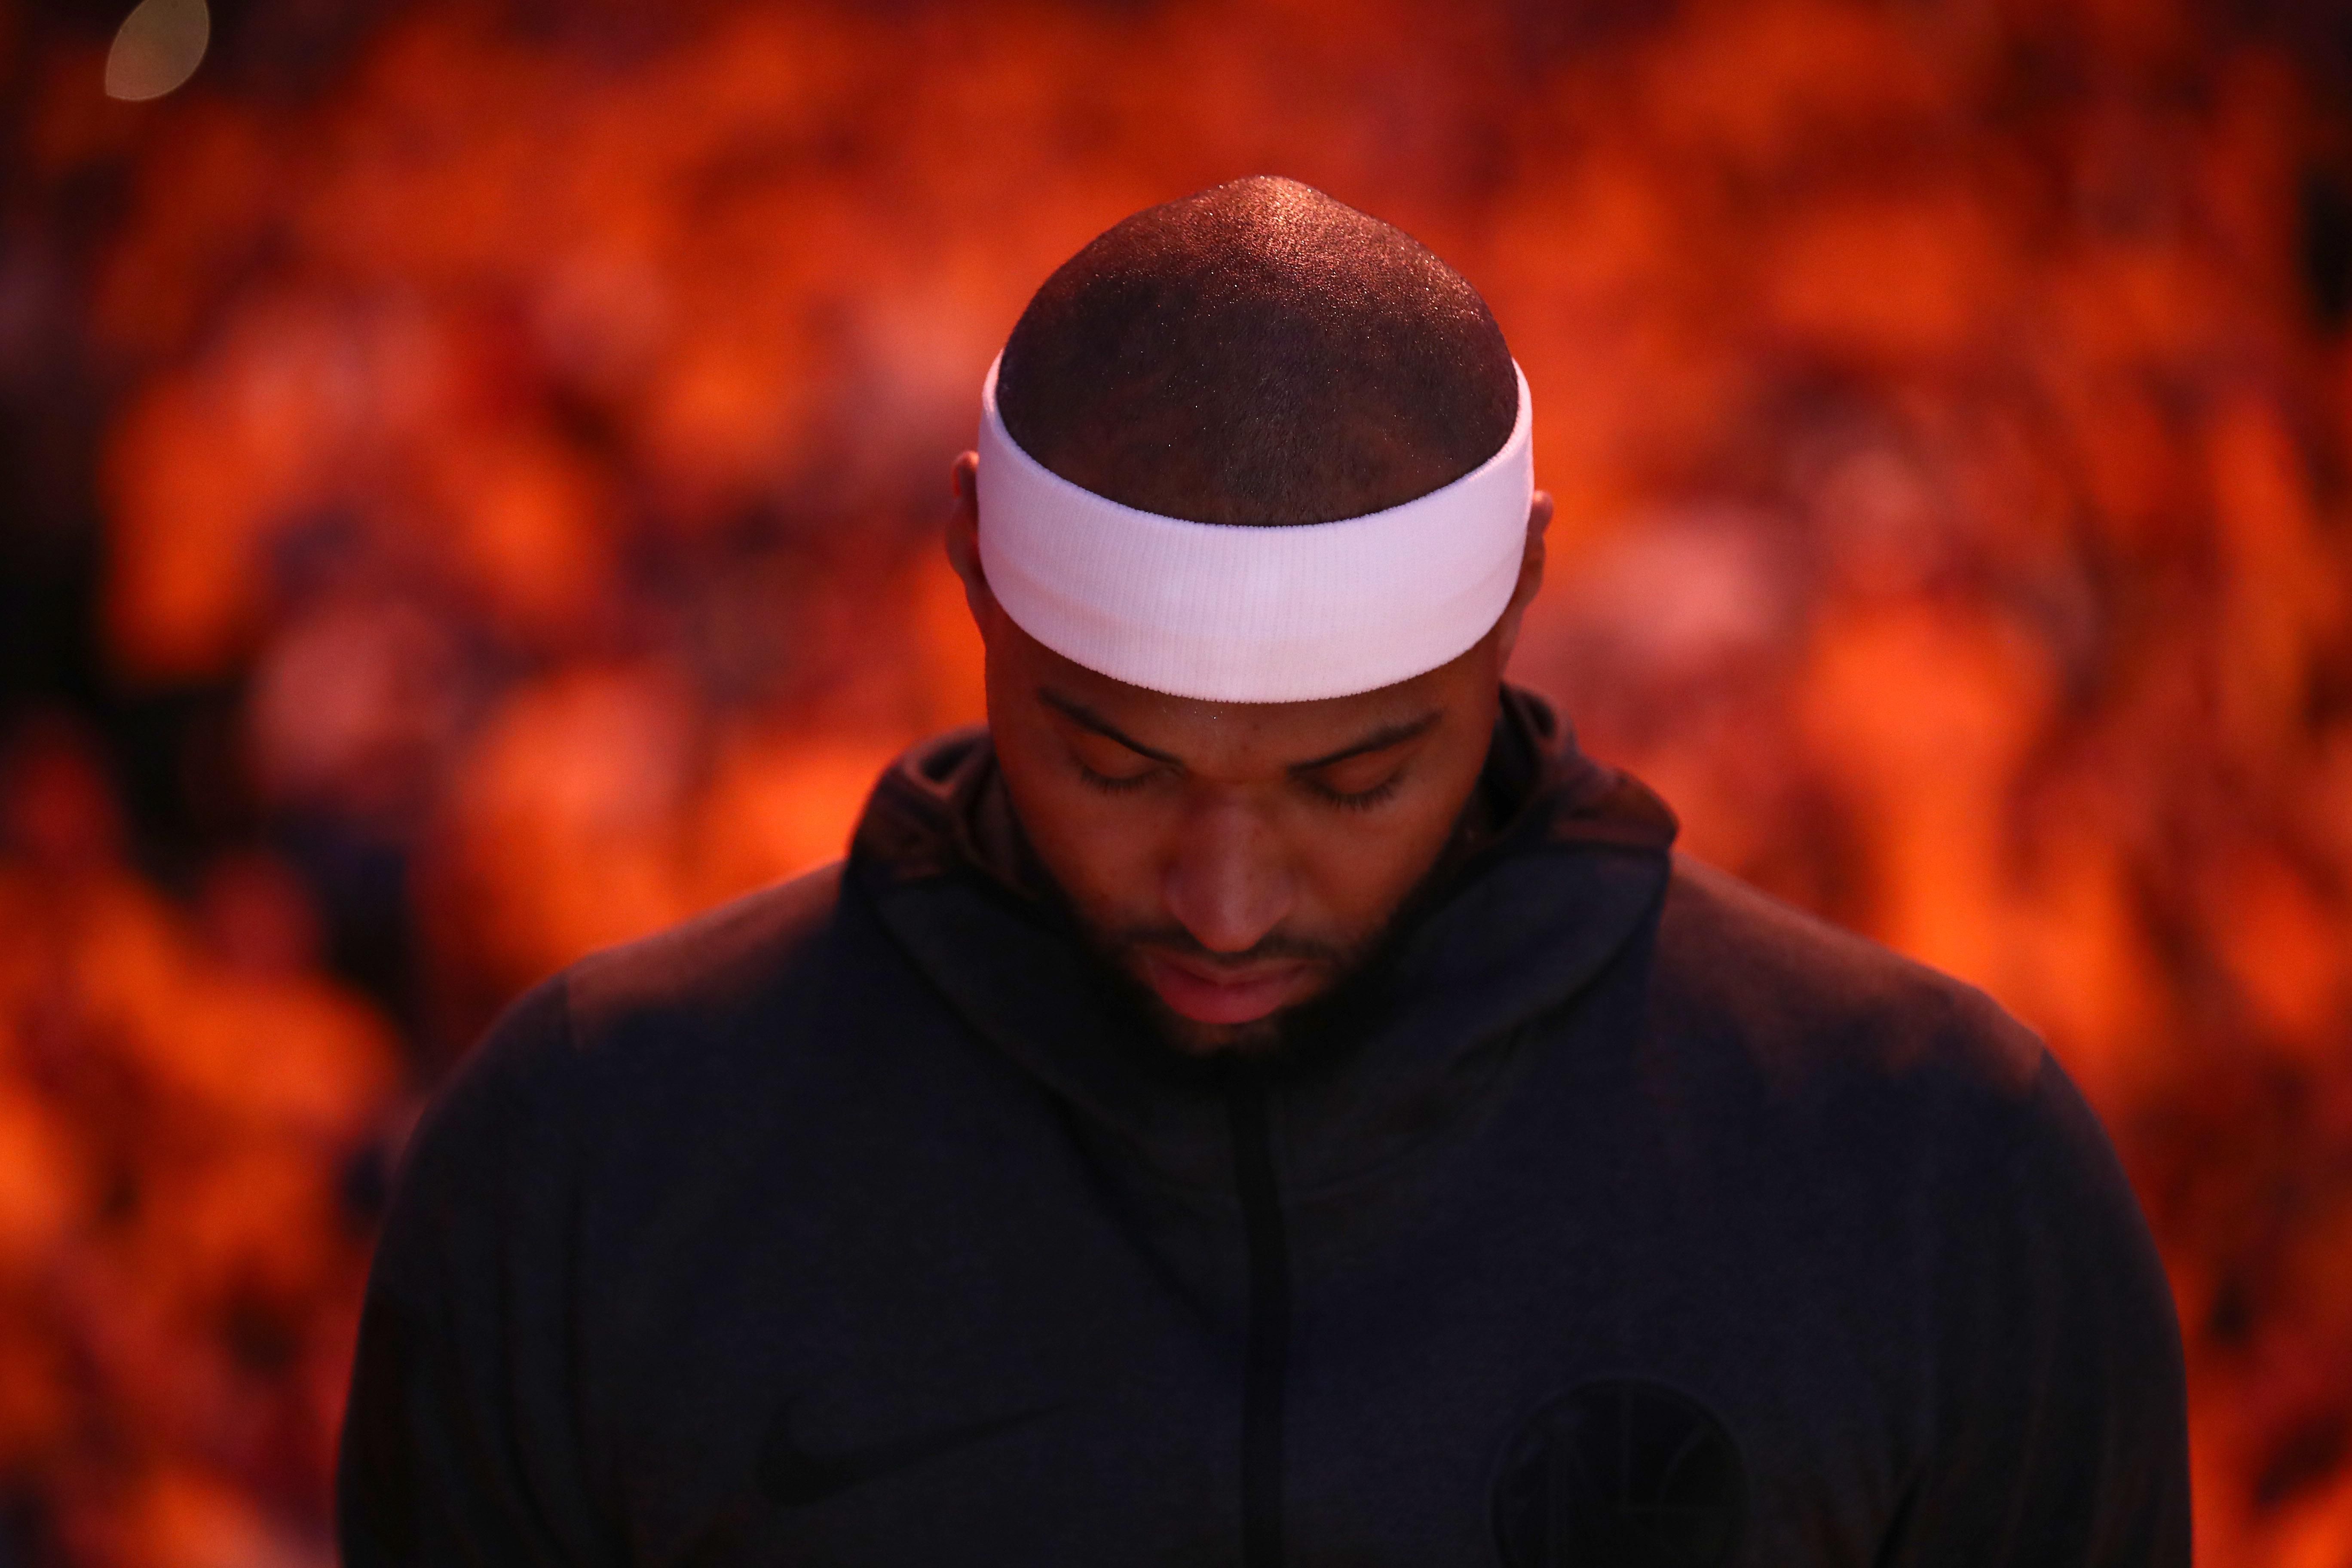 The DeMarcus Cousins rumors have finally come to fruition